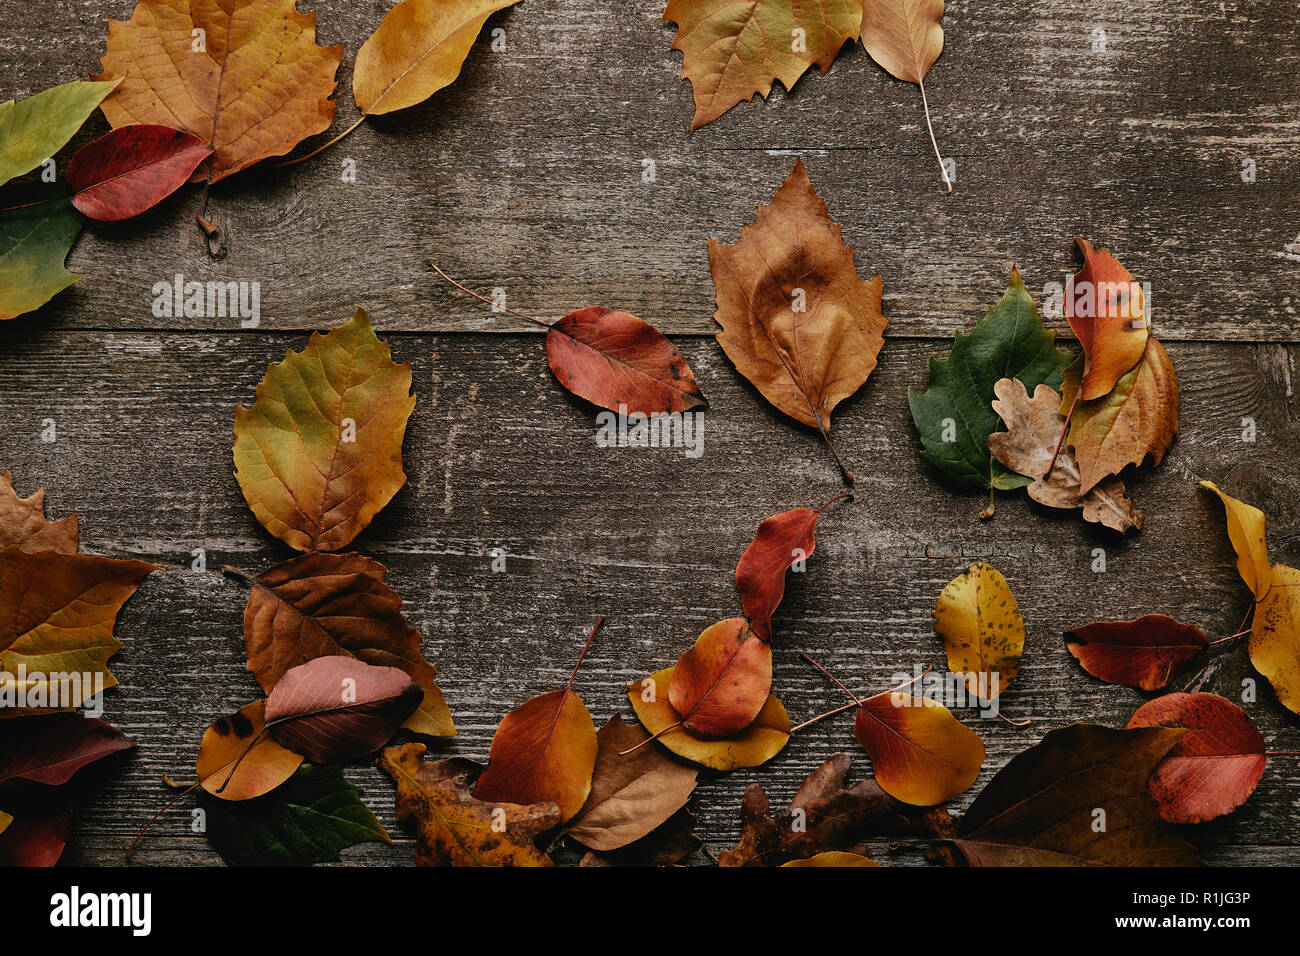 flat lay with colorful fallen leaves on wooden surface Stock Photo